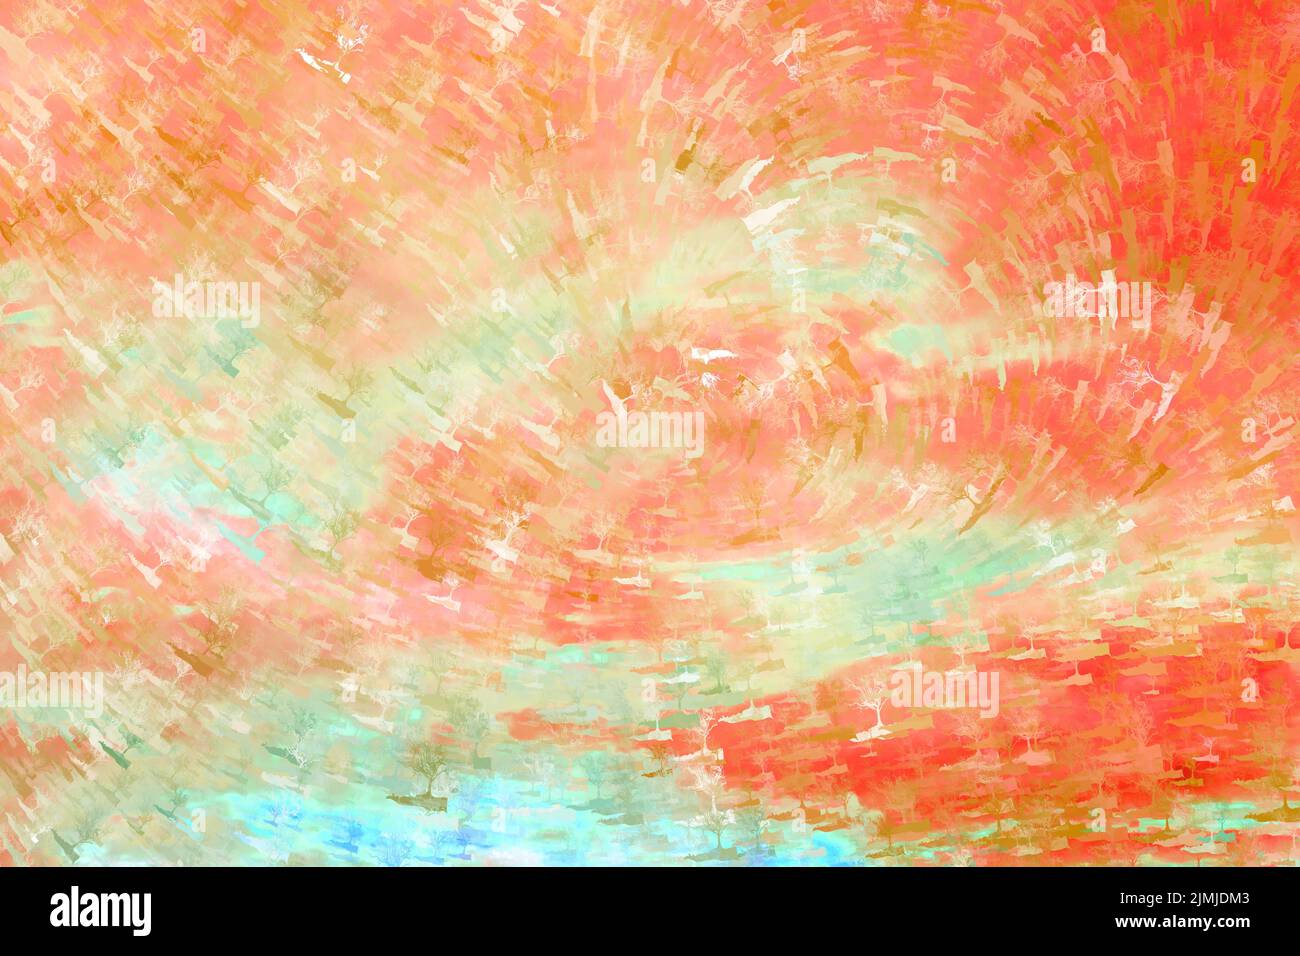 Background of an abstract sky either sunset or sunrise orange skyline with brushwork in the Van Gogh Starry Night style. Stock Vector